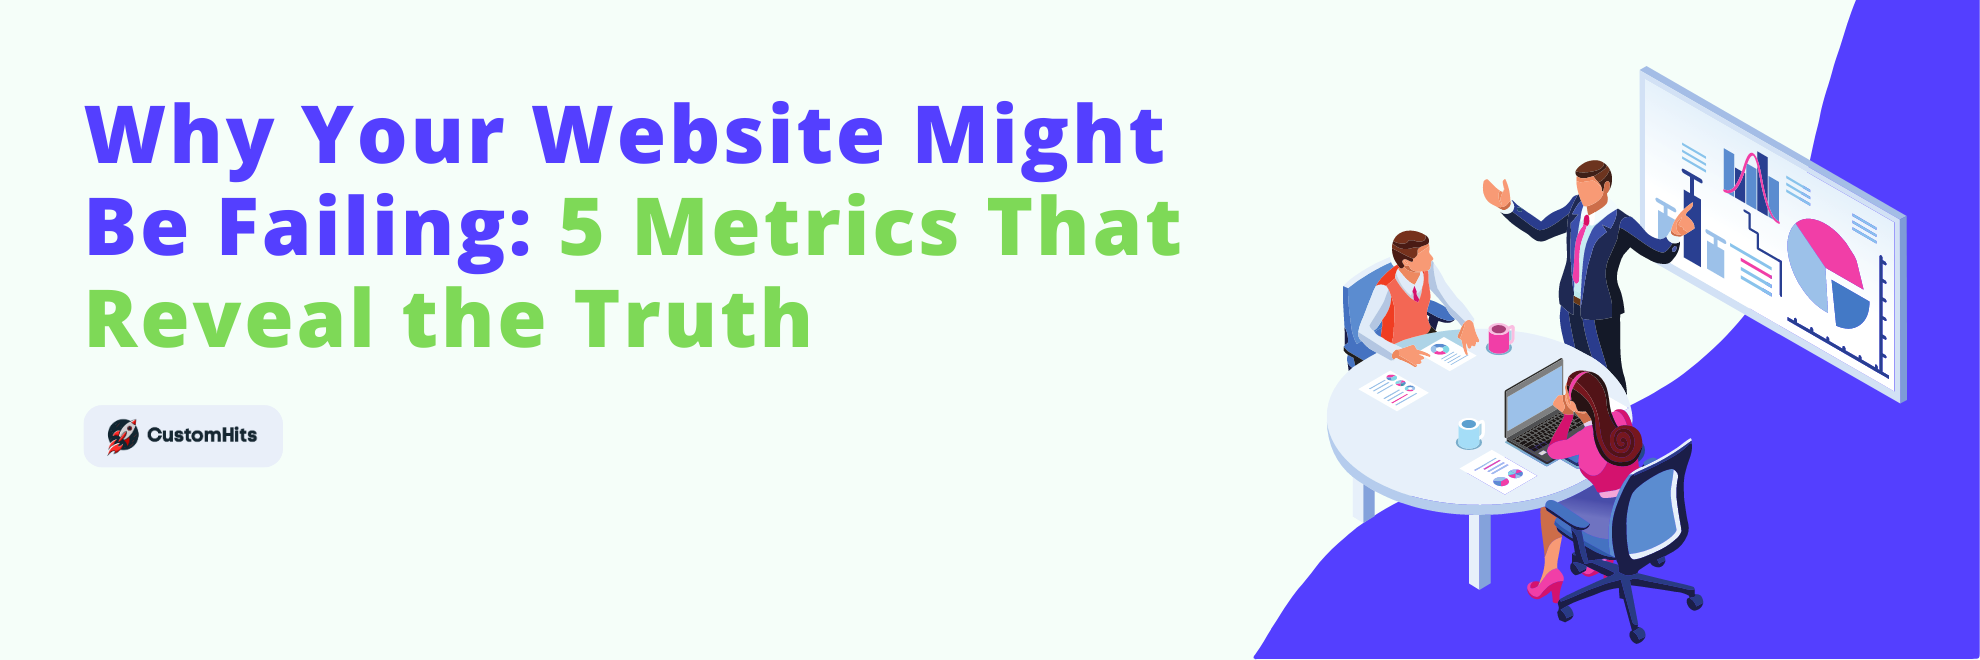 Why Your Website Might Be Failing: 5 Metrics That Reveal the Truth